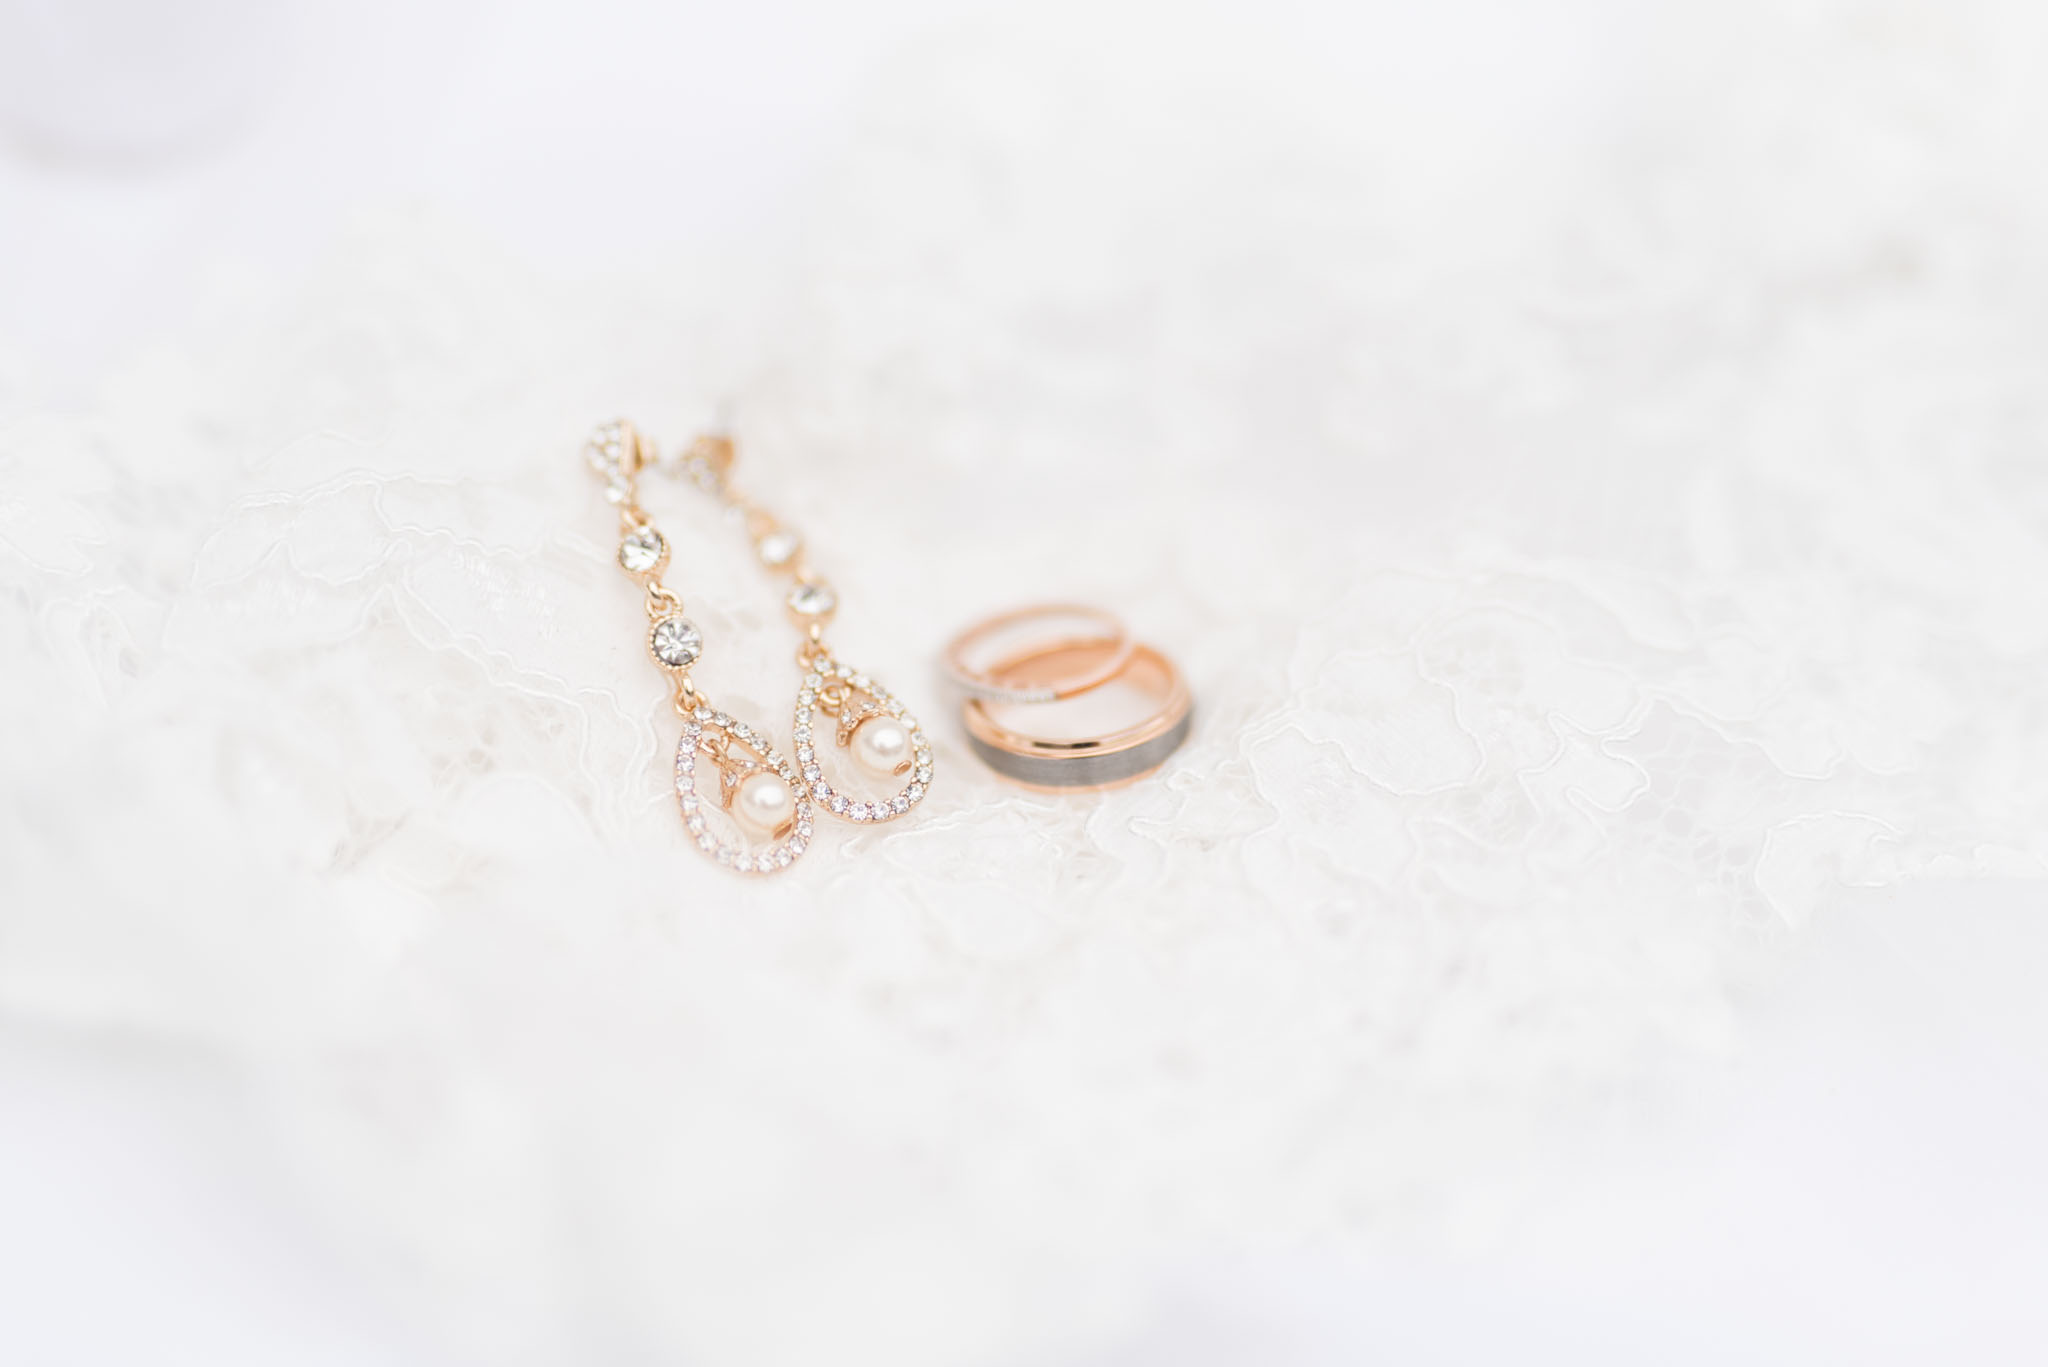 Bridal earrings and wedding bands sit on lace.